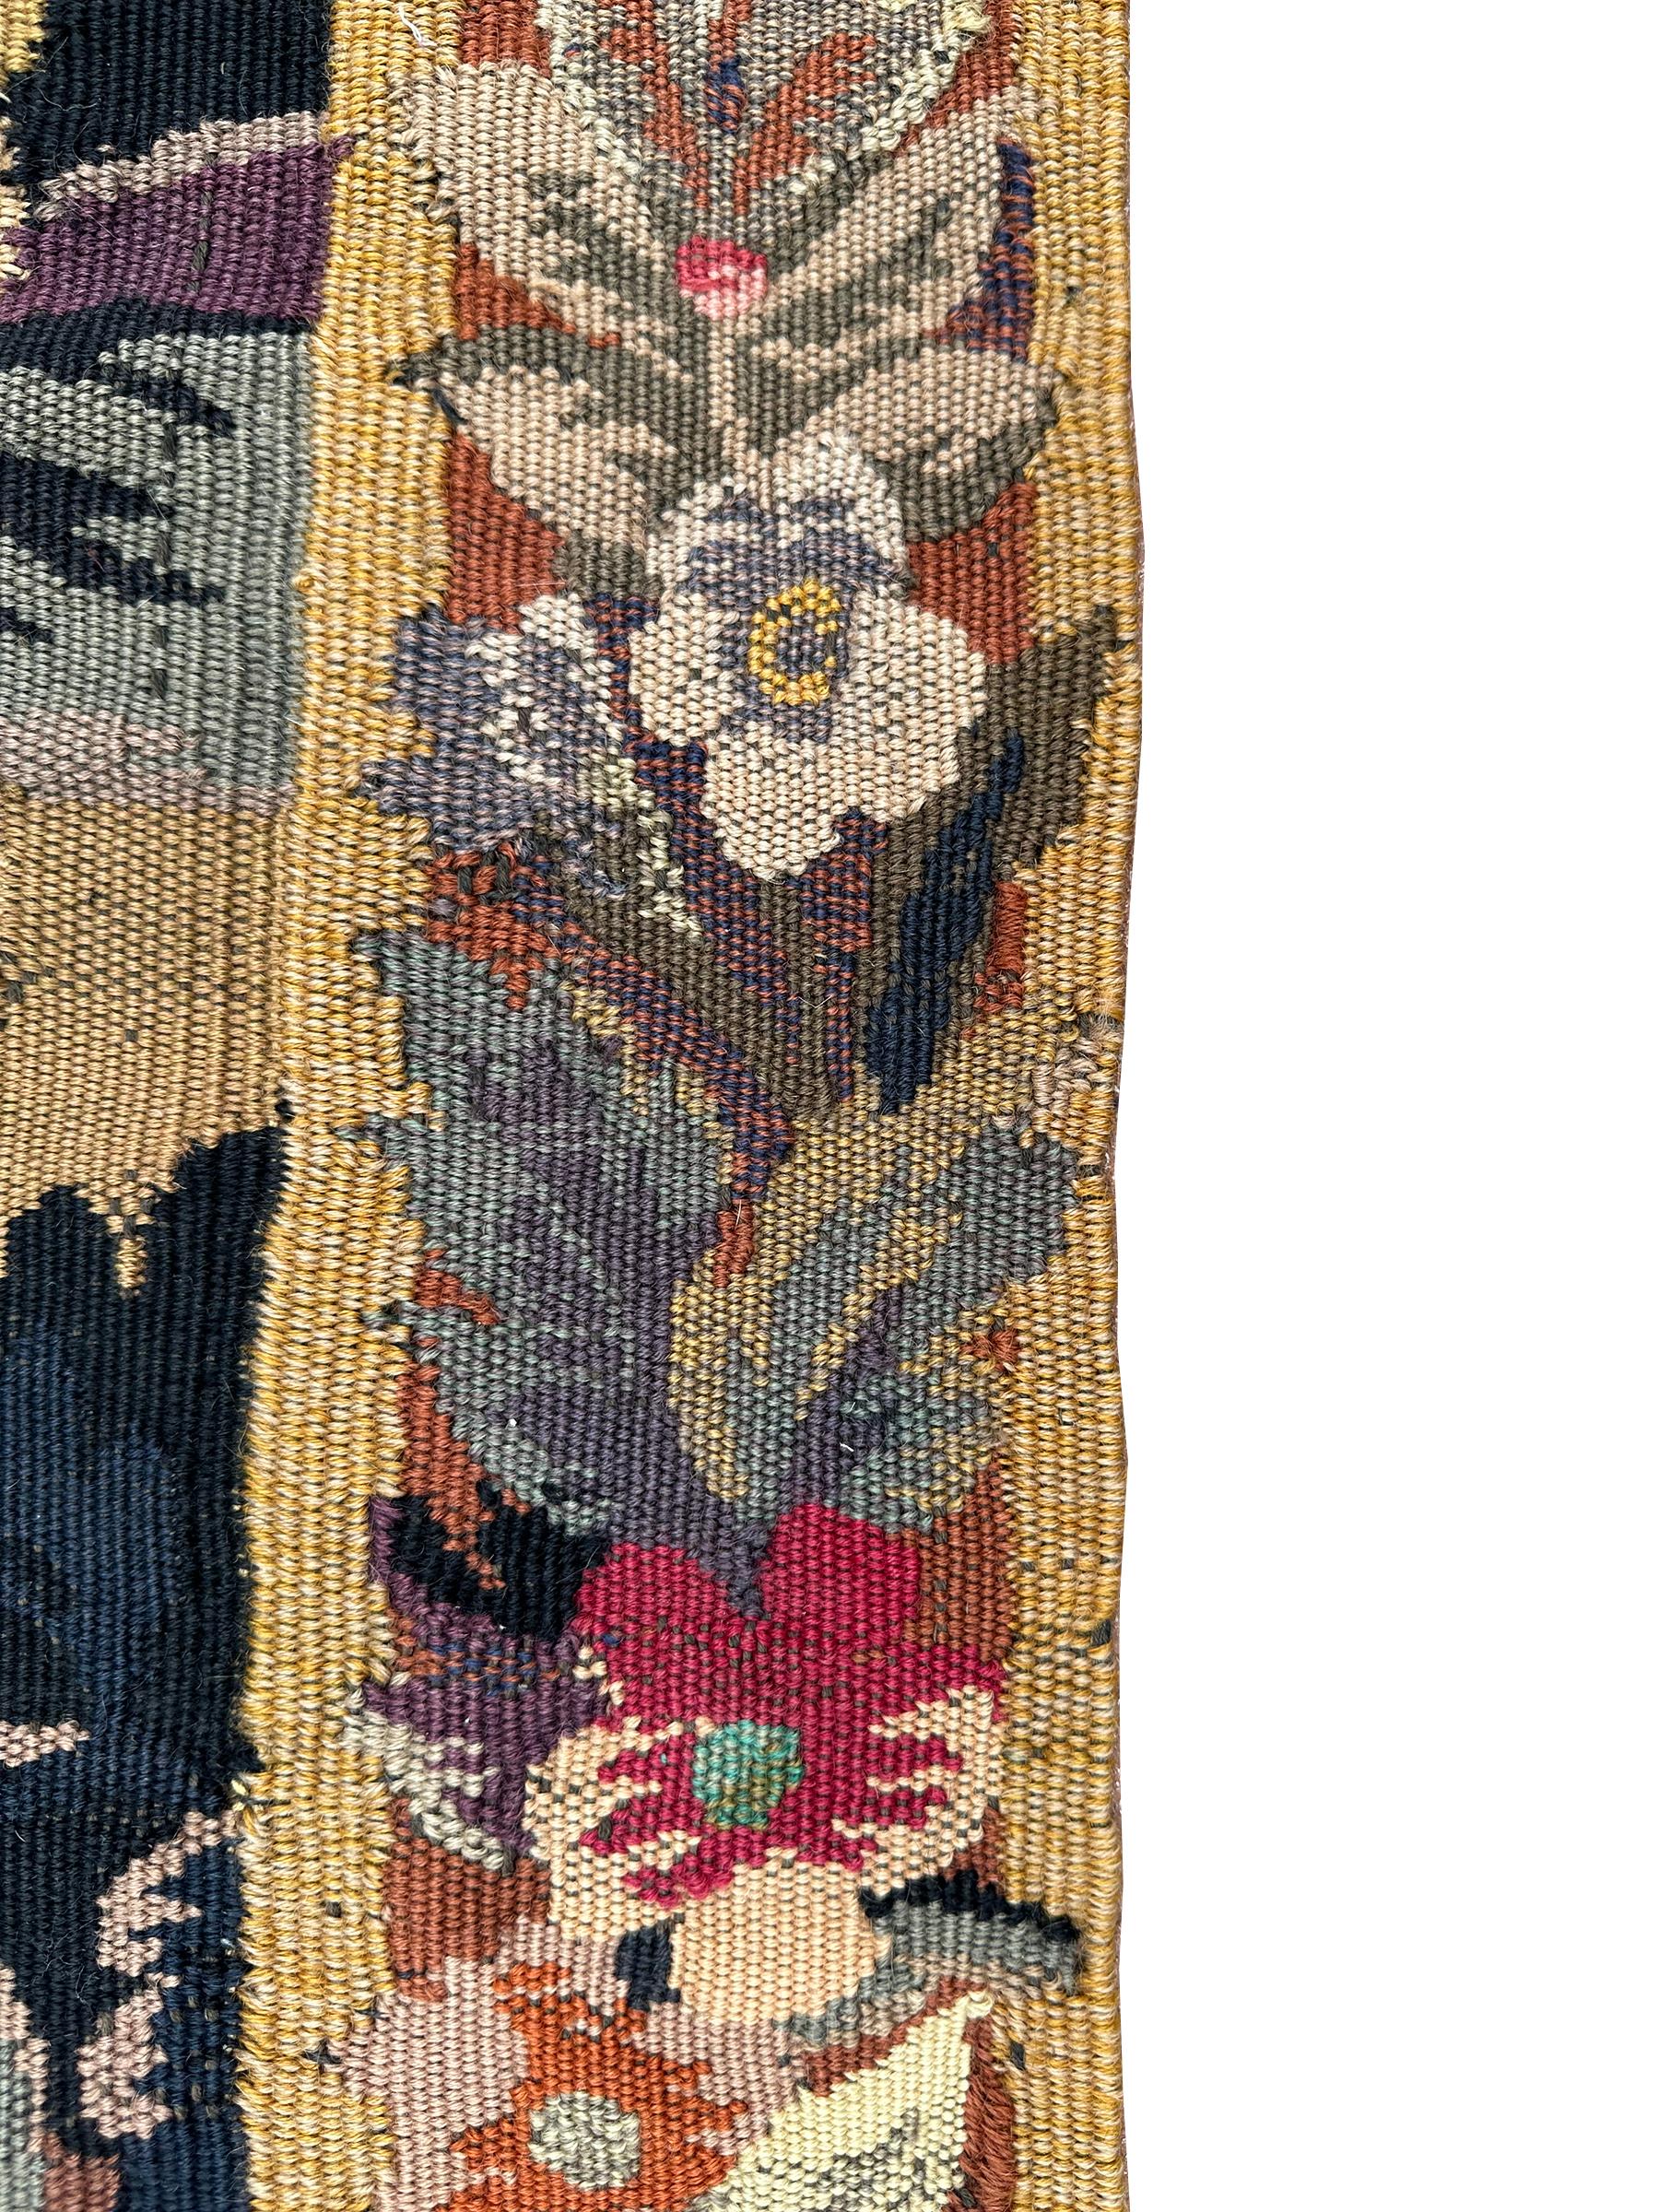 Antique French Tapestry Exotic Flowers Animals Rare Black Verdure 3x6 92 x 168cm For Sale 1